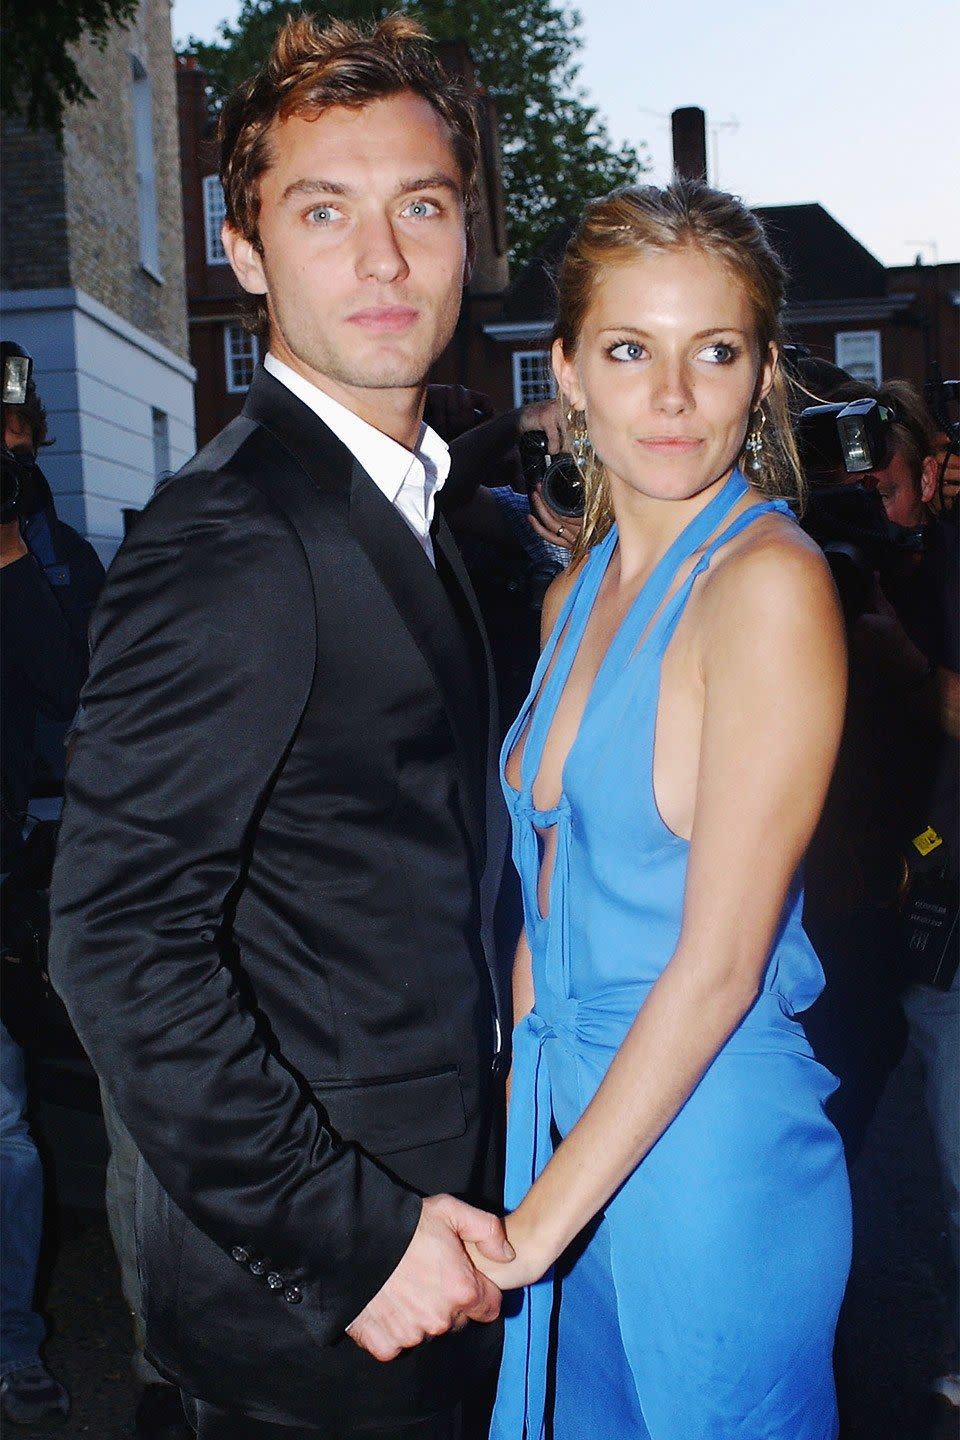 Jude Law and Sienna Miller